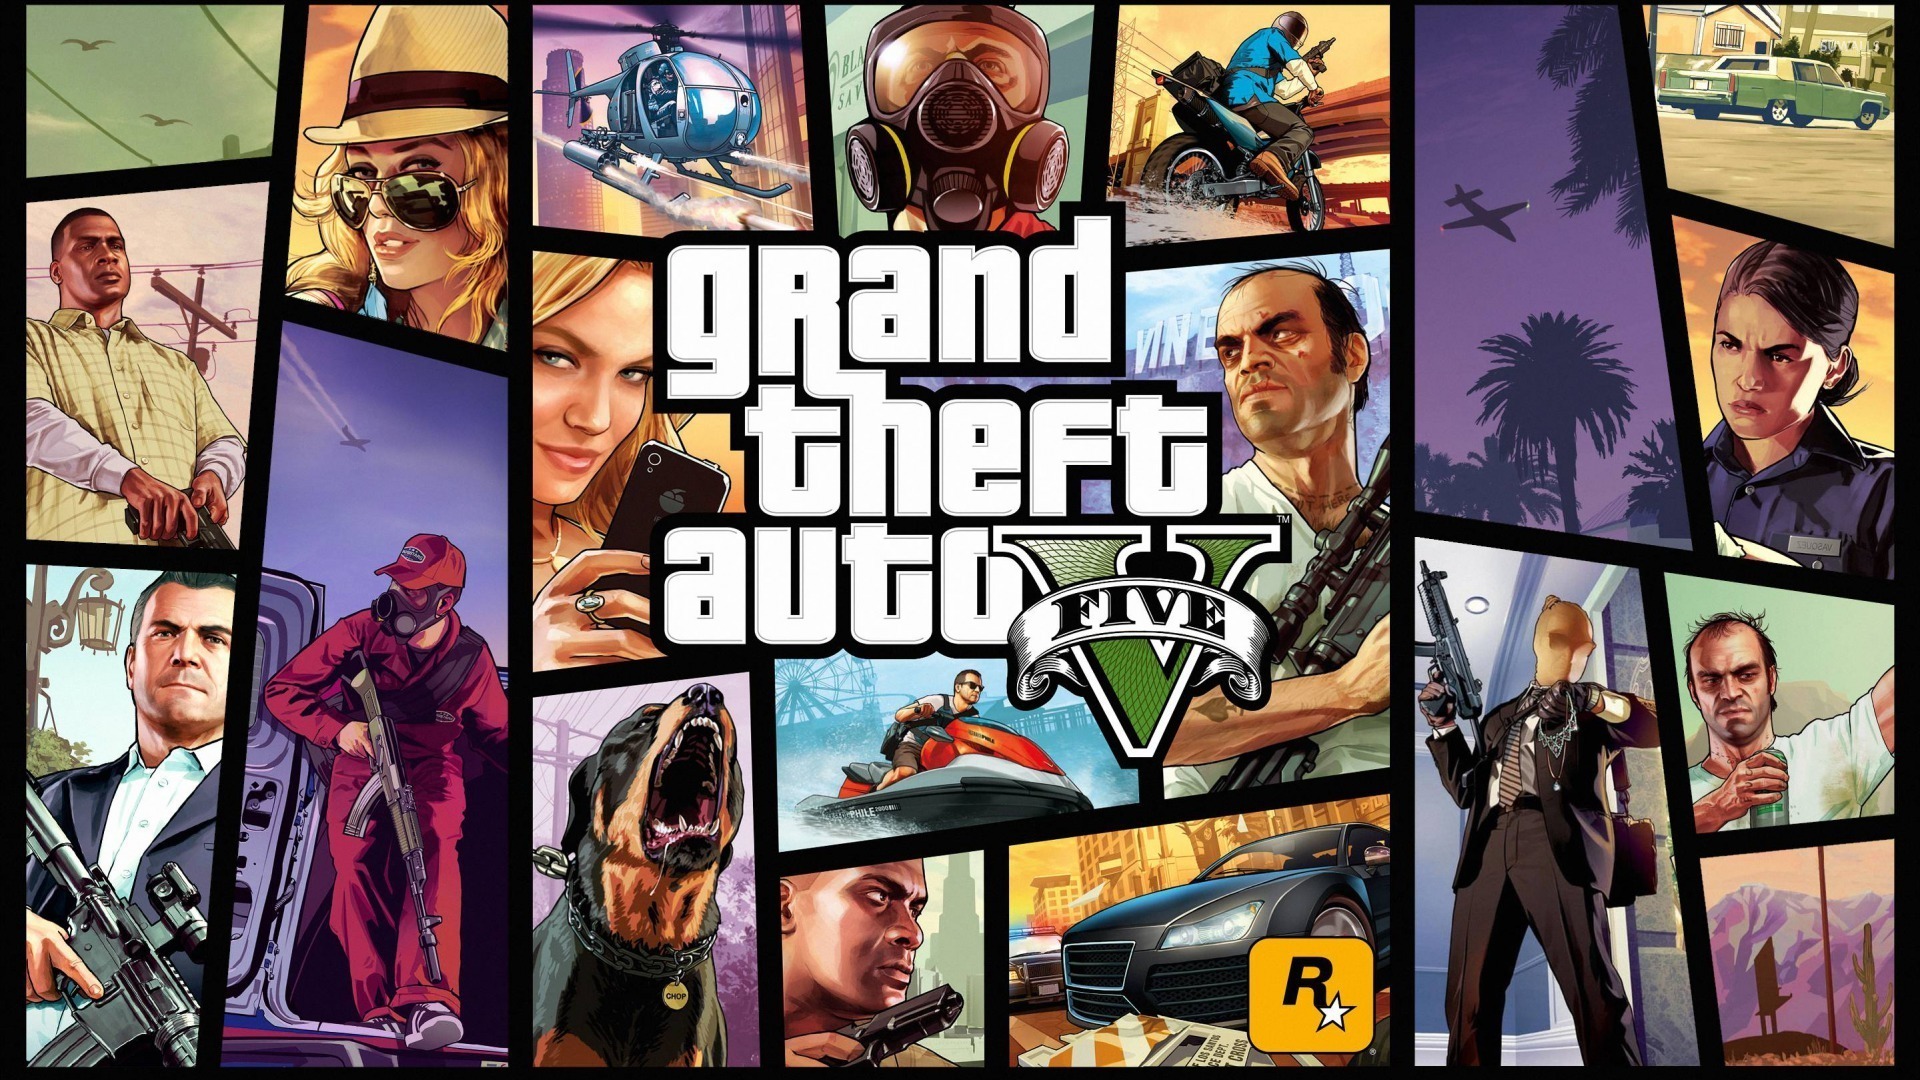 Grand Theft Auto V 4 Wallpaper Game Wallpapers 27328